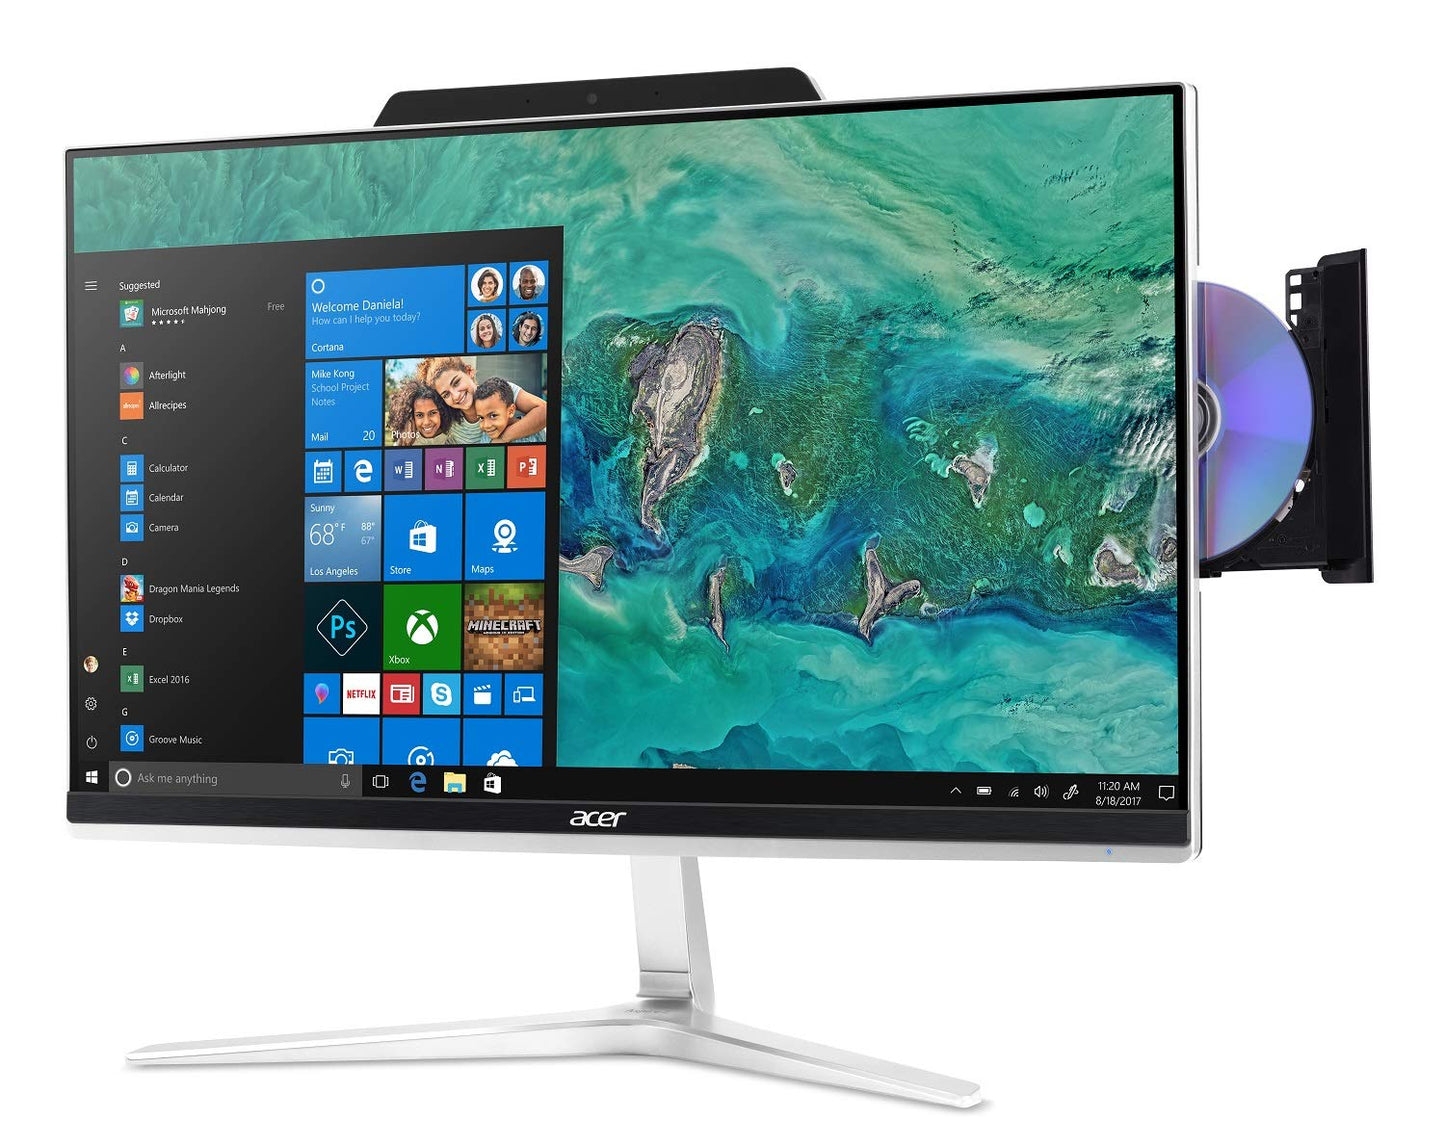 Acer Aspire Z24-890-UR11 AIO Touch Desktop, 23.8" Full HD Touch, Intel Core i5-8400T, 8GB DDR4 + 16GB Optane Memory, 1TB HDD, Windows 10 Home